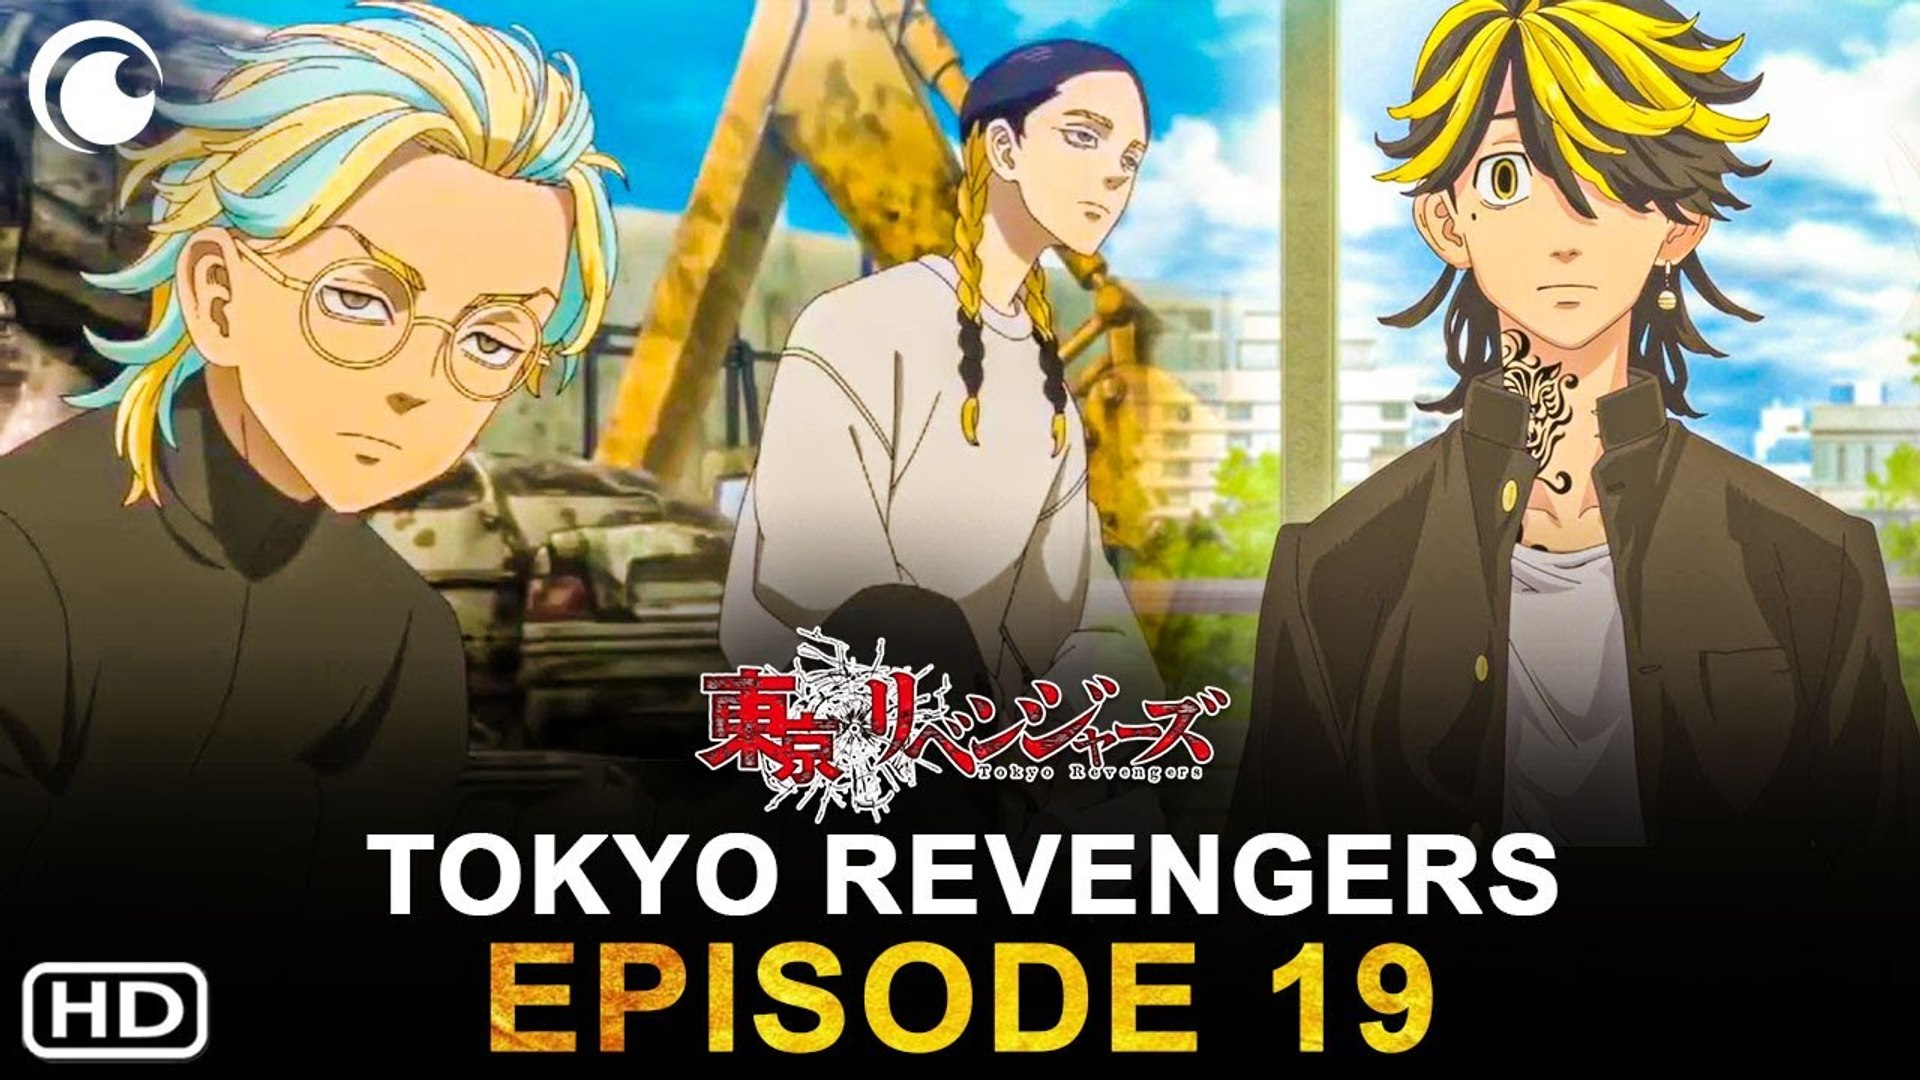 Will there be a Tokyo Revengers season 4?